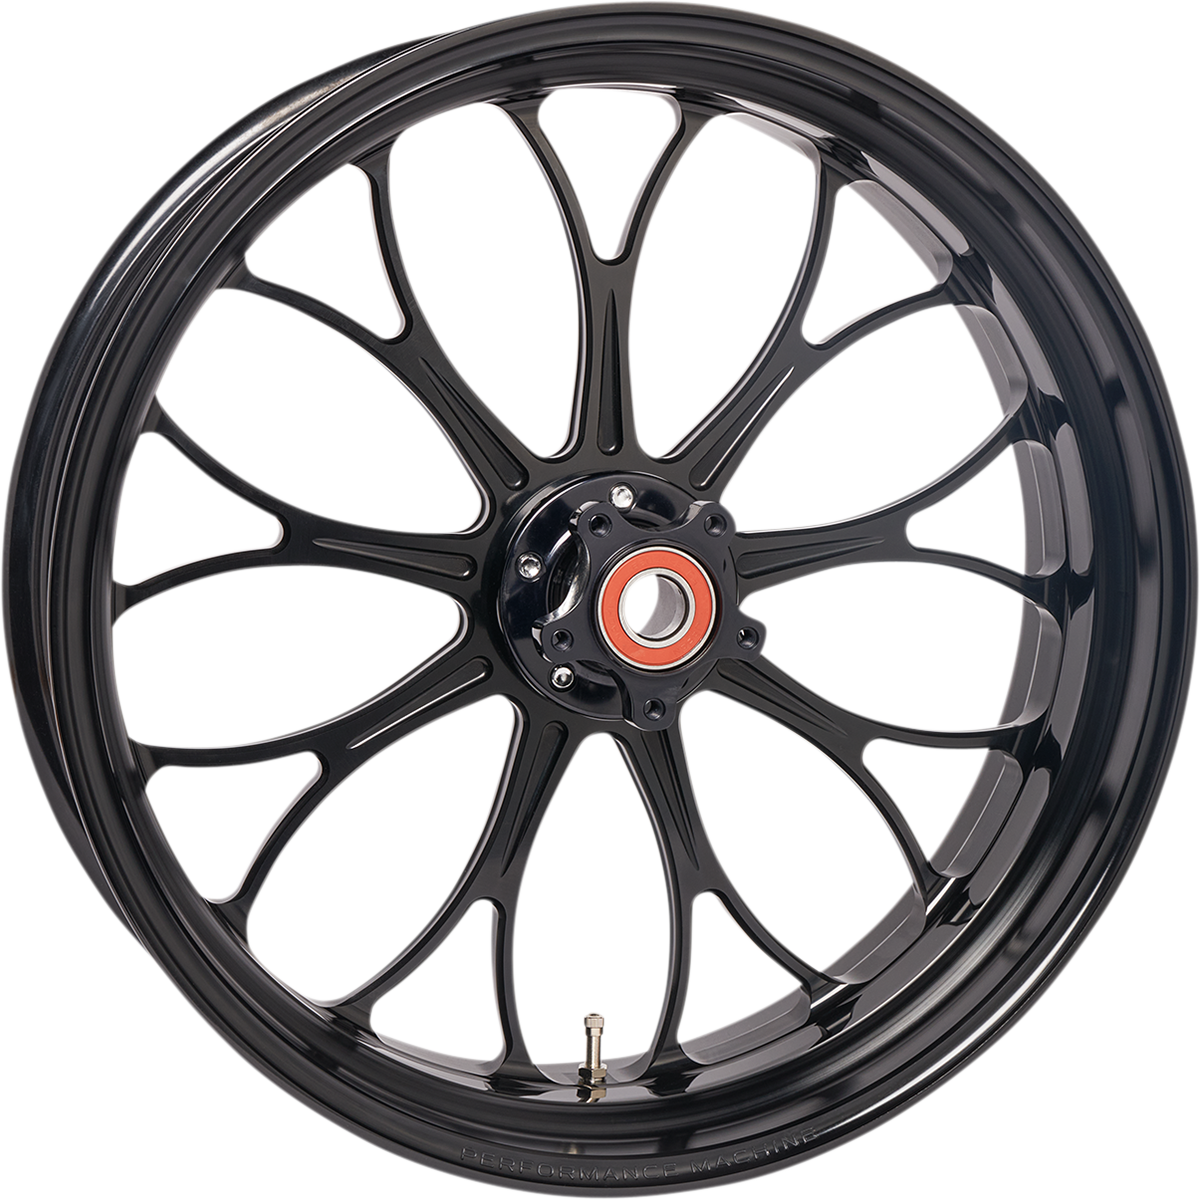 Wheel - Revolution - Dual Disc - Front - Gold Ops™ - 21"x3.50" - No ABS